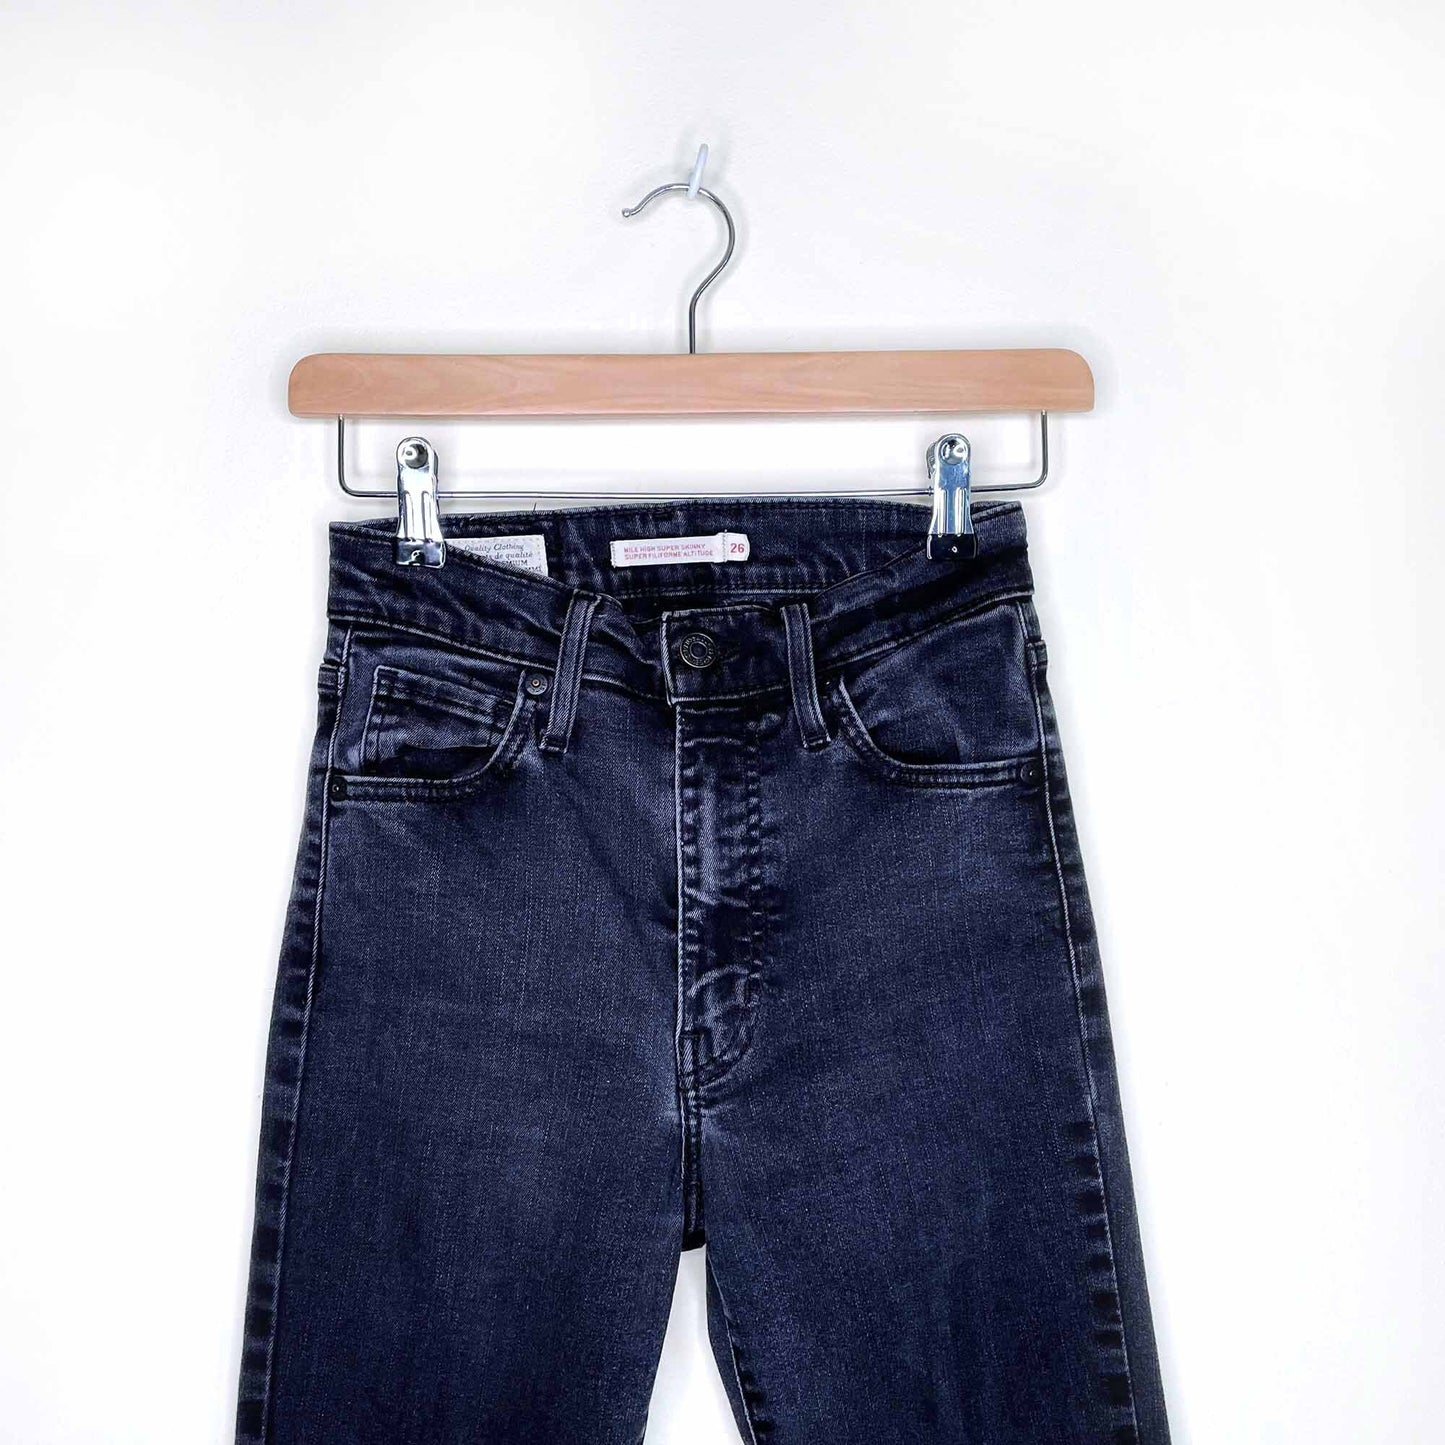 levi's mile high super skinny in faded ink - size 26